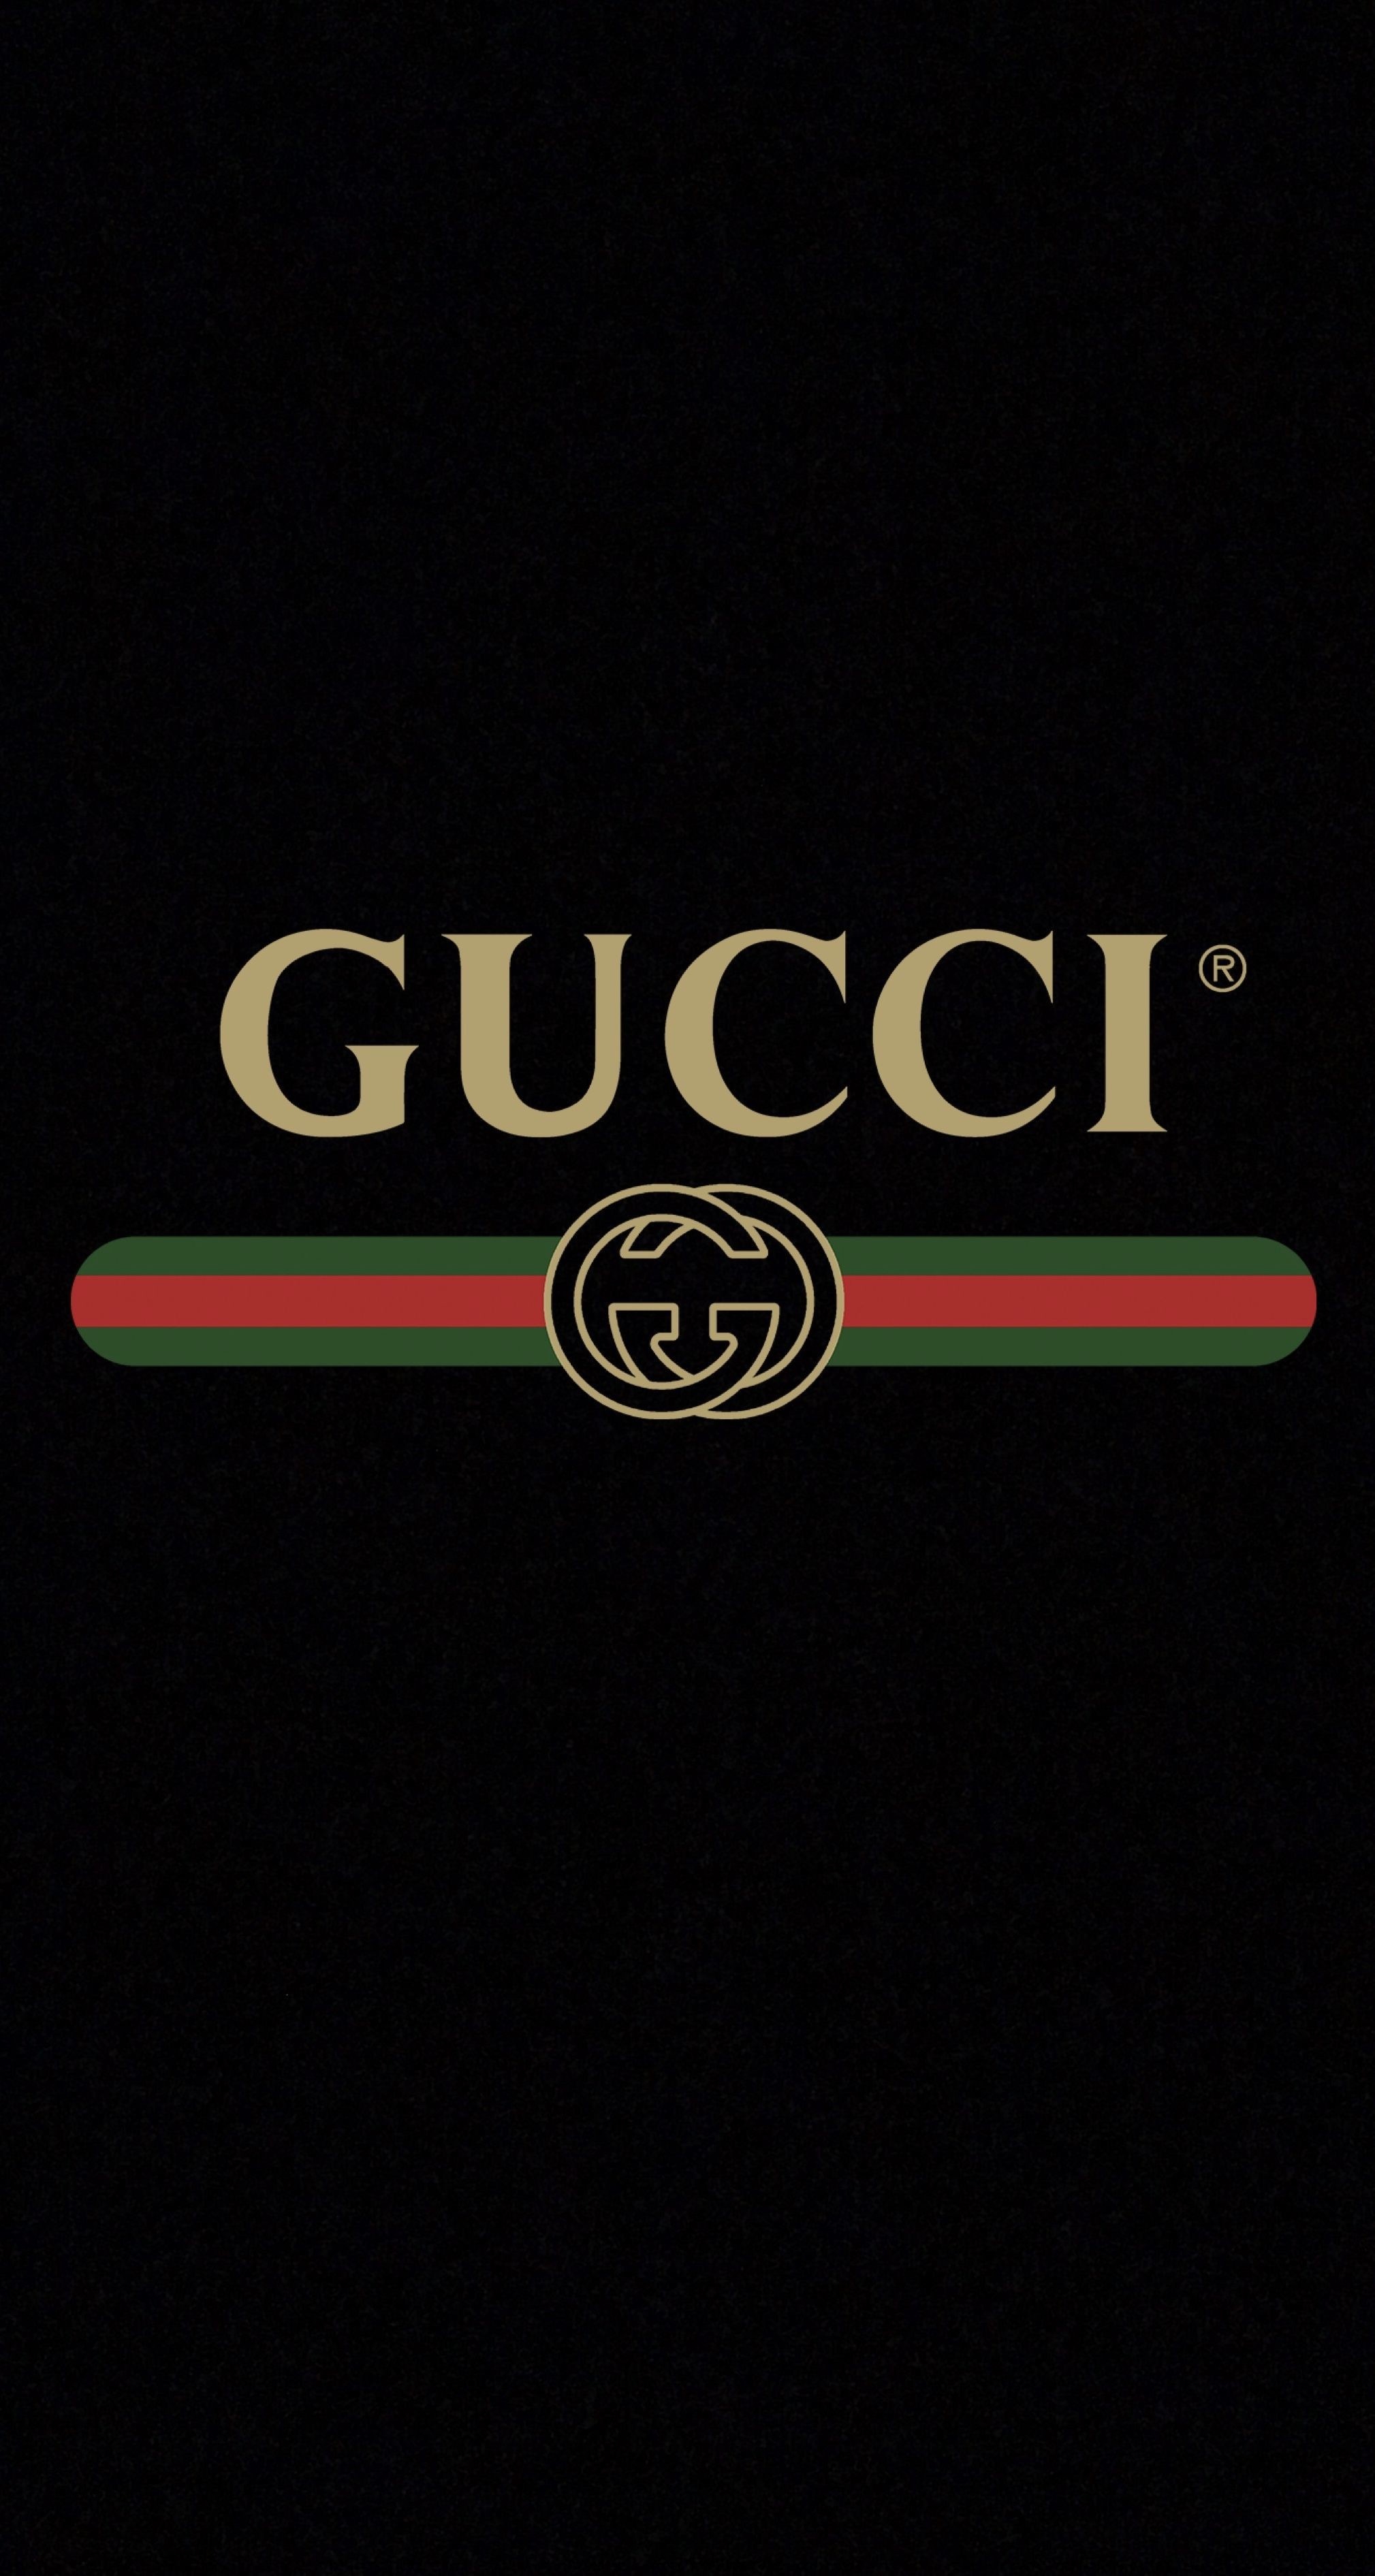 Gucci: Founded in Florence in 1921, One of the world's leading luxury fashion brands. 2020x3790 HD Background.